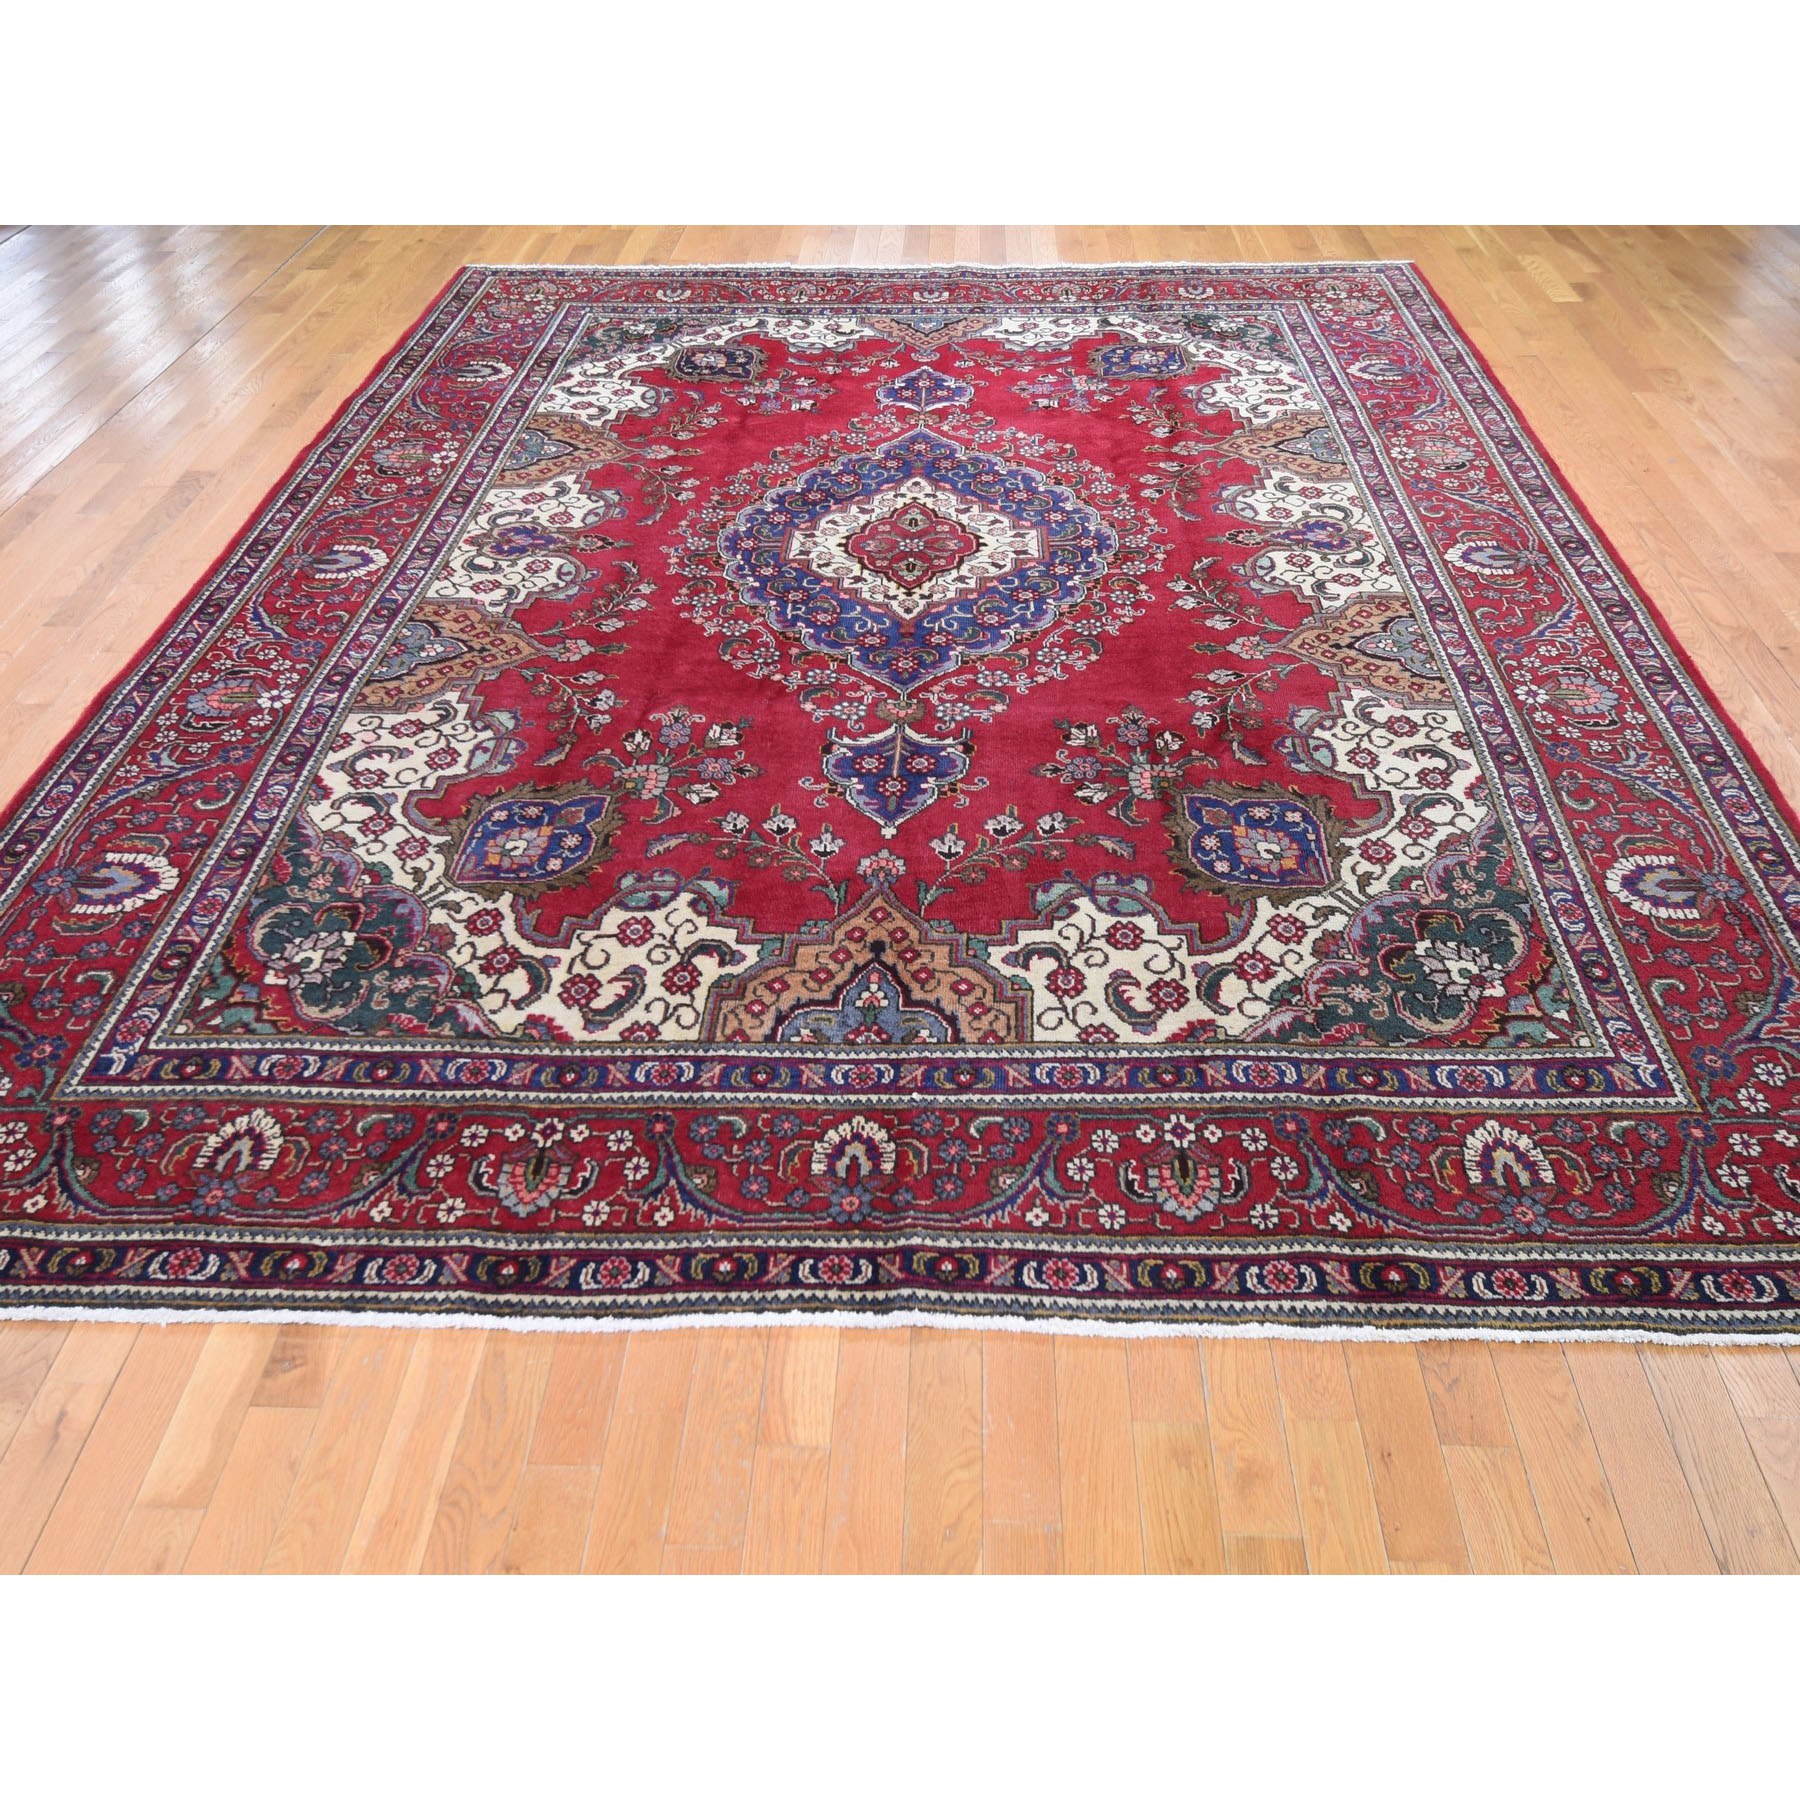 9-10 x12-2  Red Vintage Persian Tabriz Some Wear Pure Wool Hand Knotted Oriental Rug 